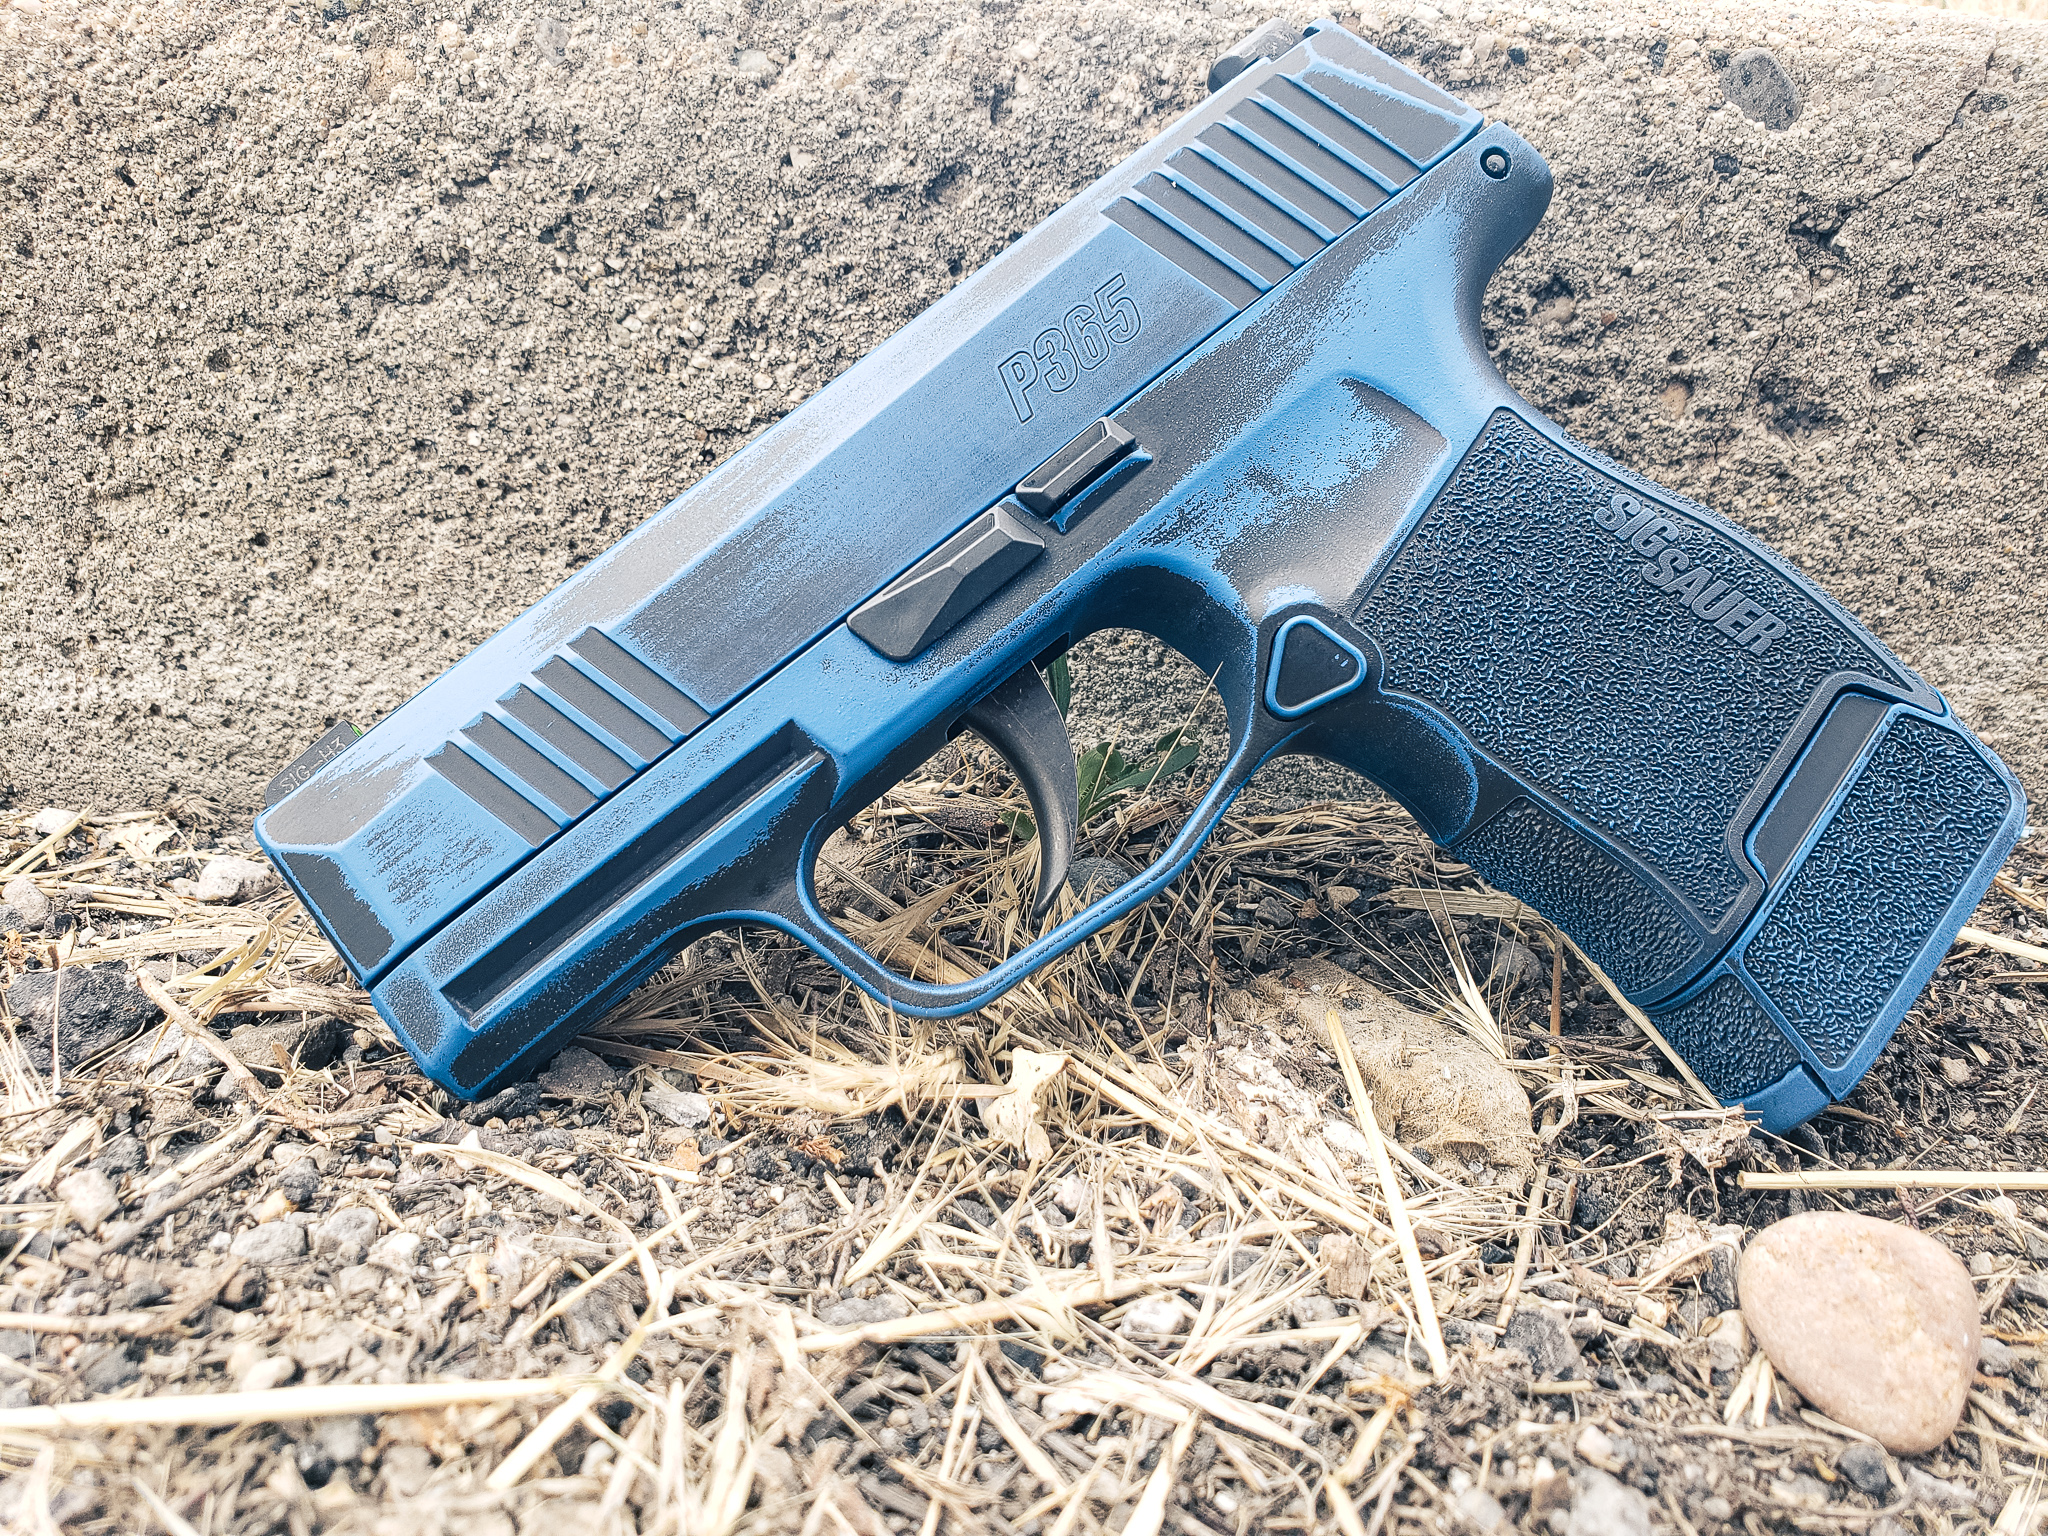 The Difference Between Cerakote and Other Firearm & Automotive